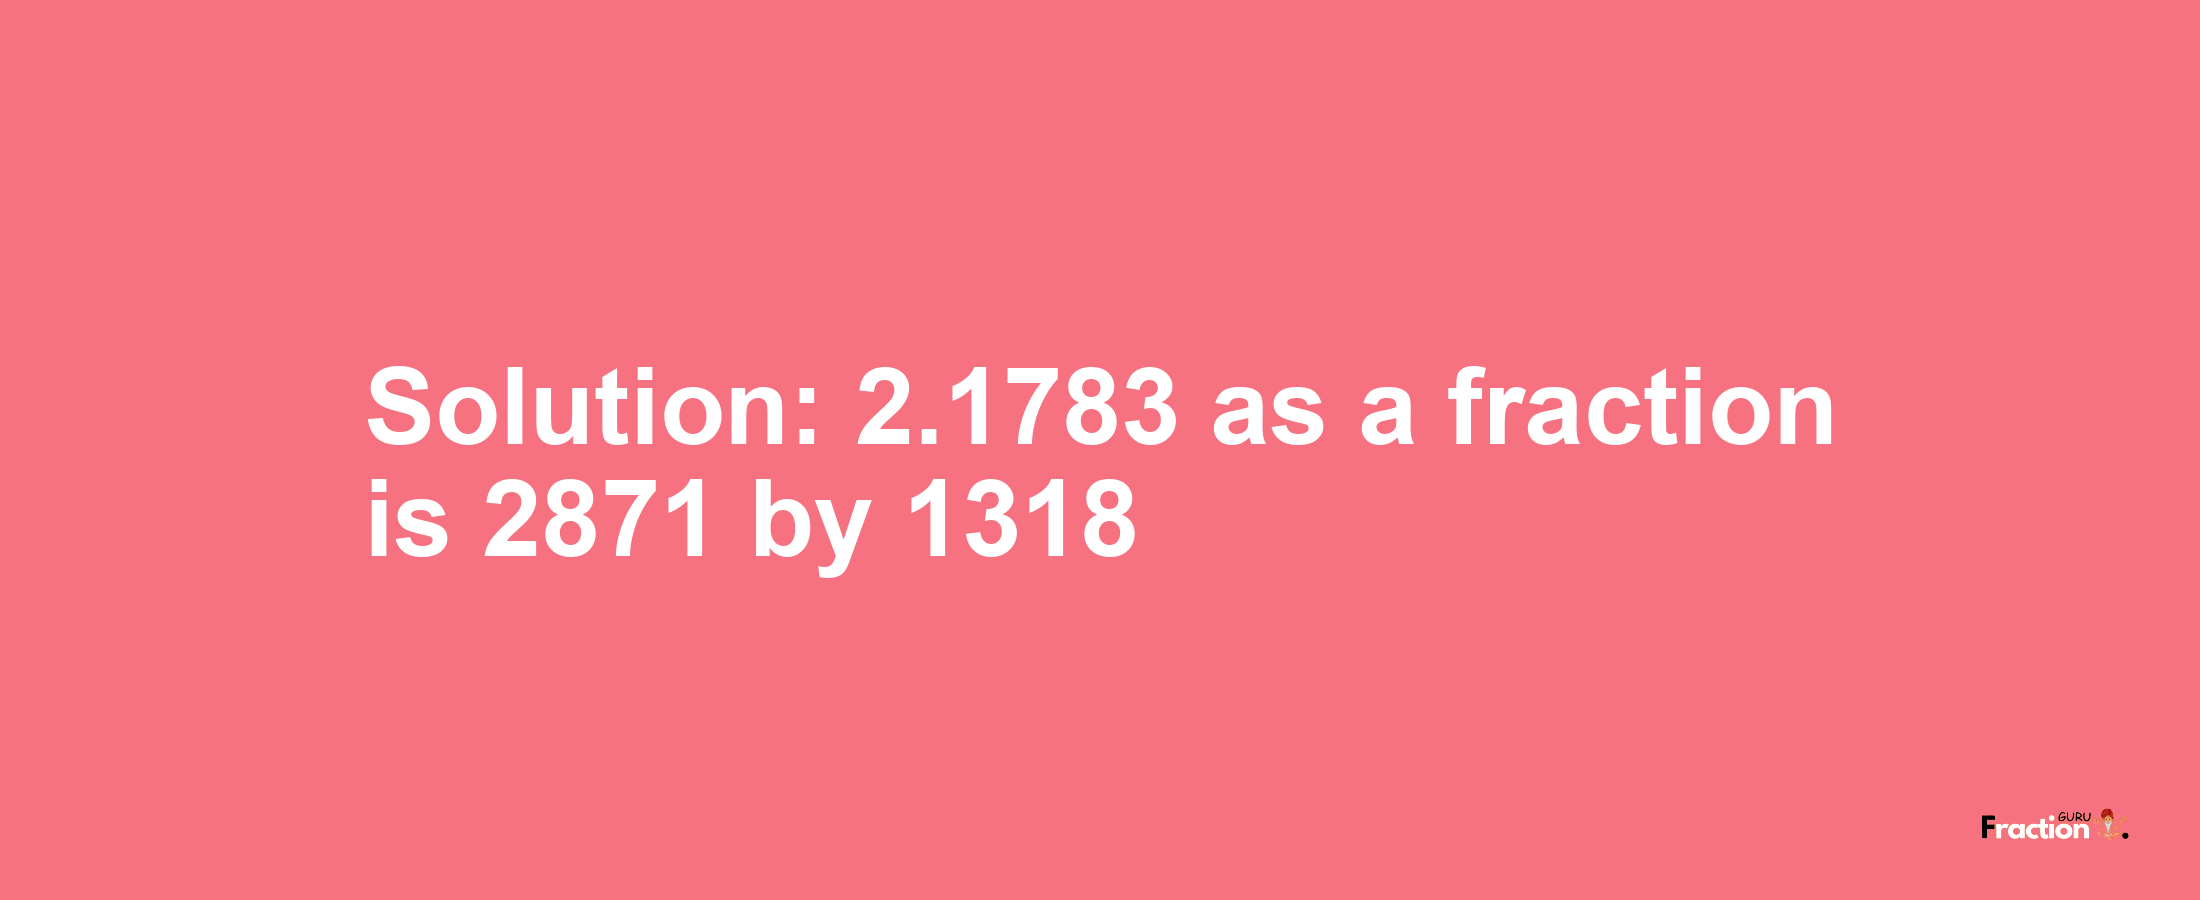 Solution:2.1783 as a fraction is 2871/1318